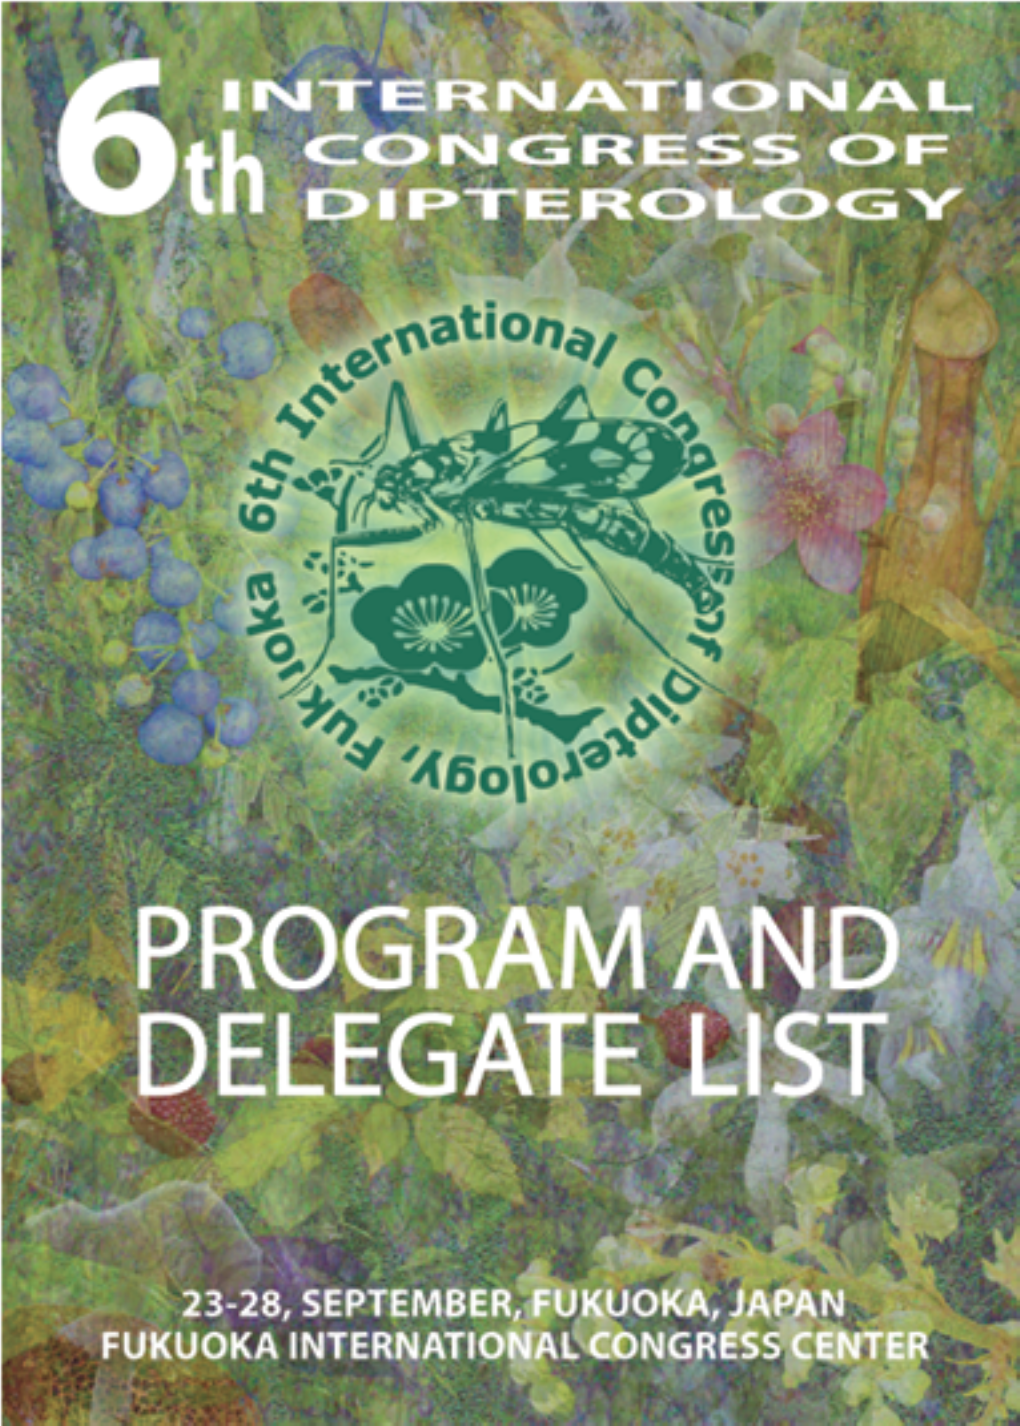 View the PDF of the Program and Delegate List